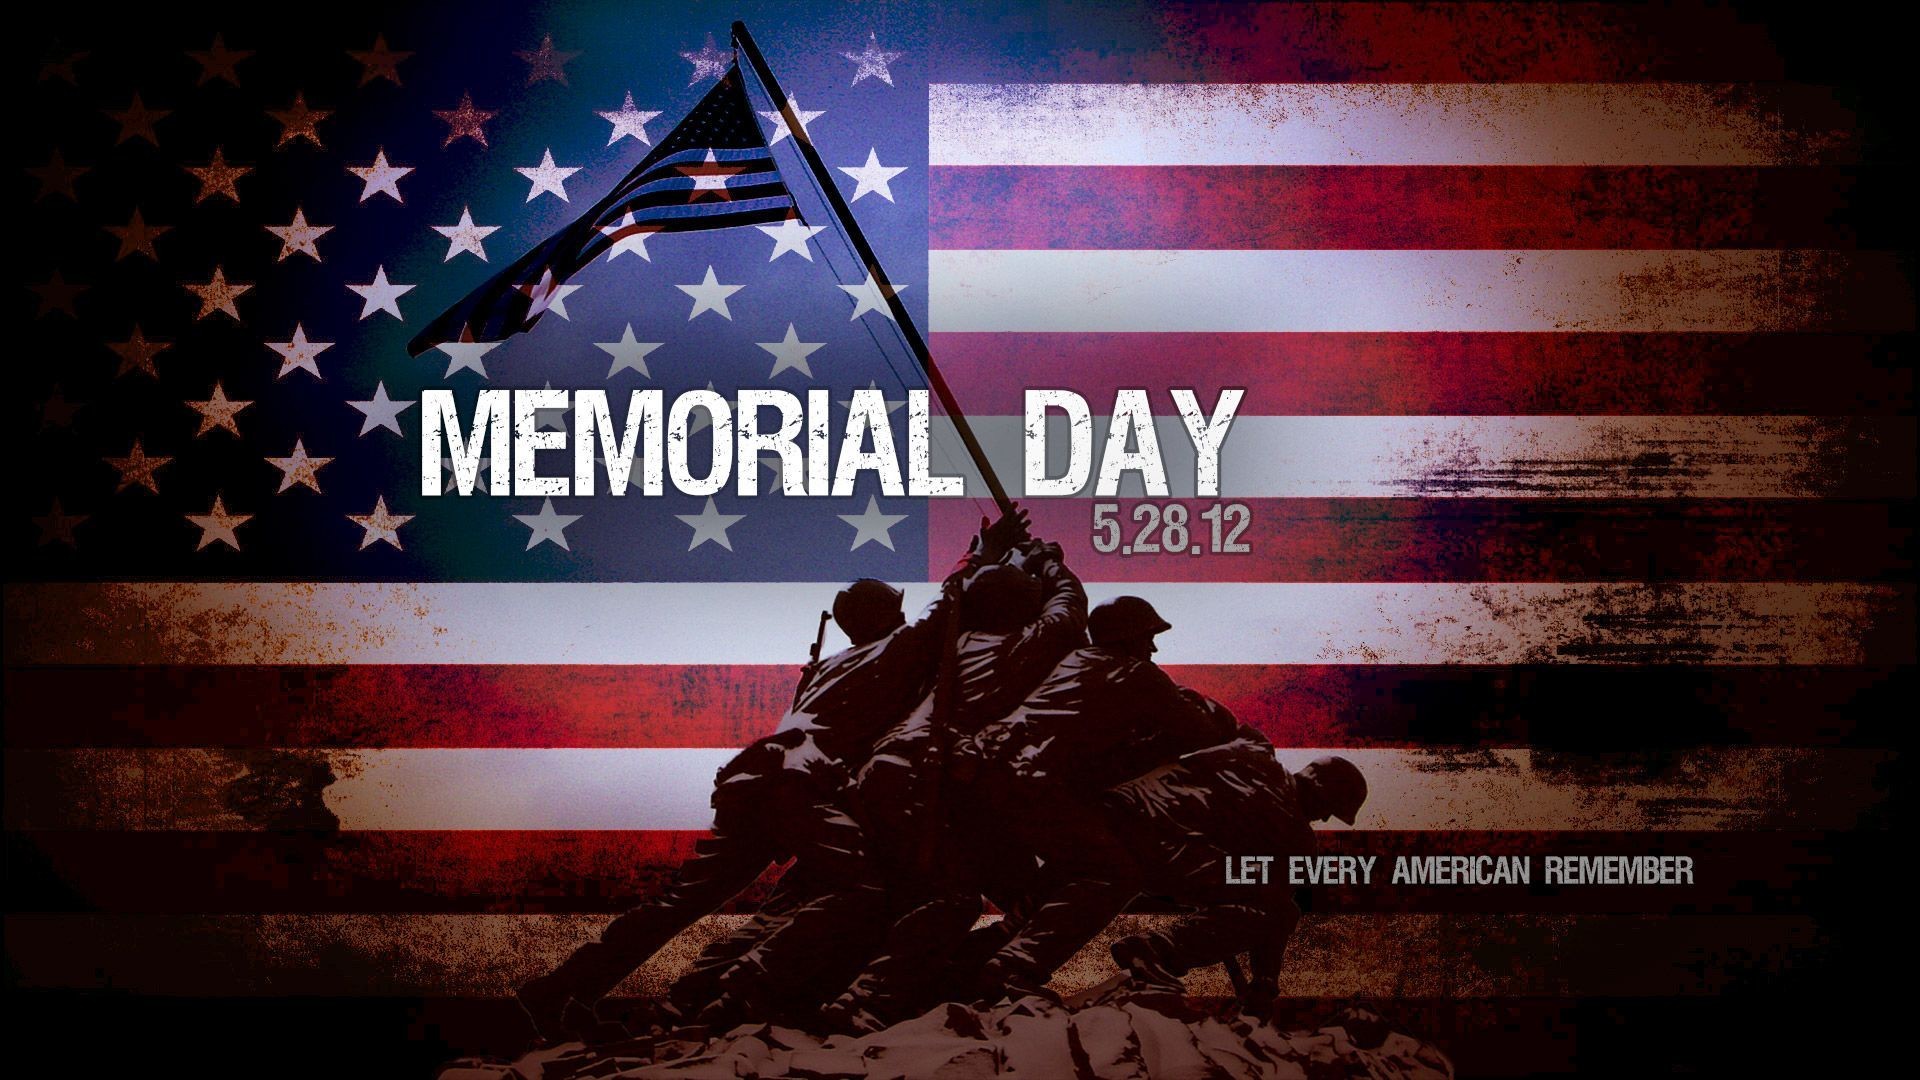 1920x1080 Backgrounds In High Quality: Memorial Day Wallpapers by Yasmin Tienda,  07/04/